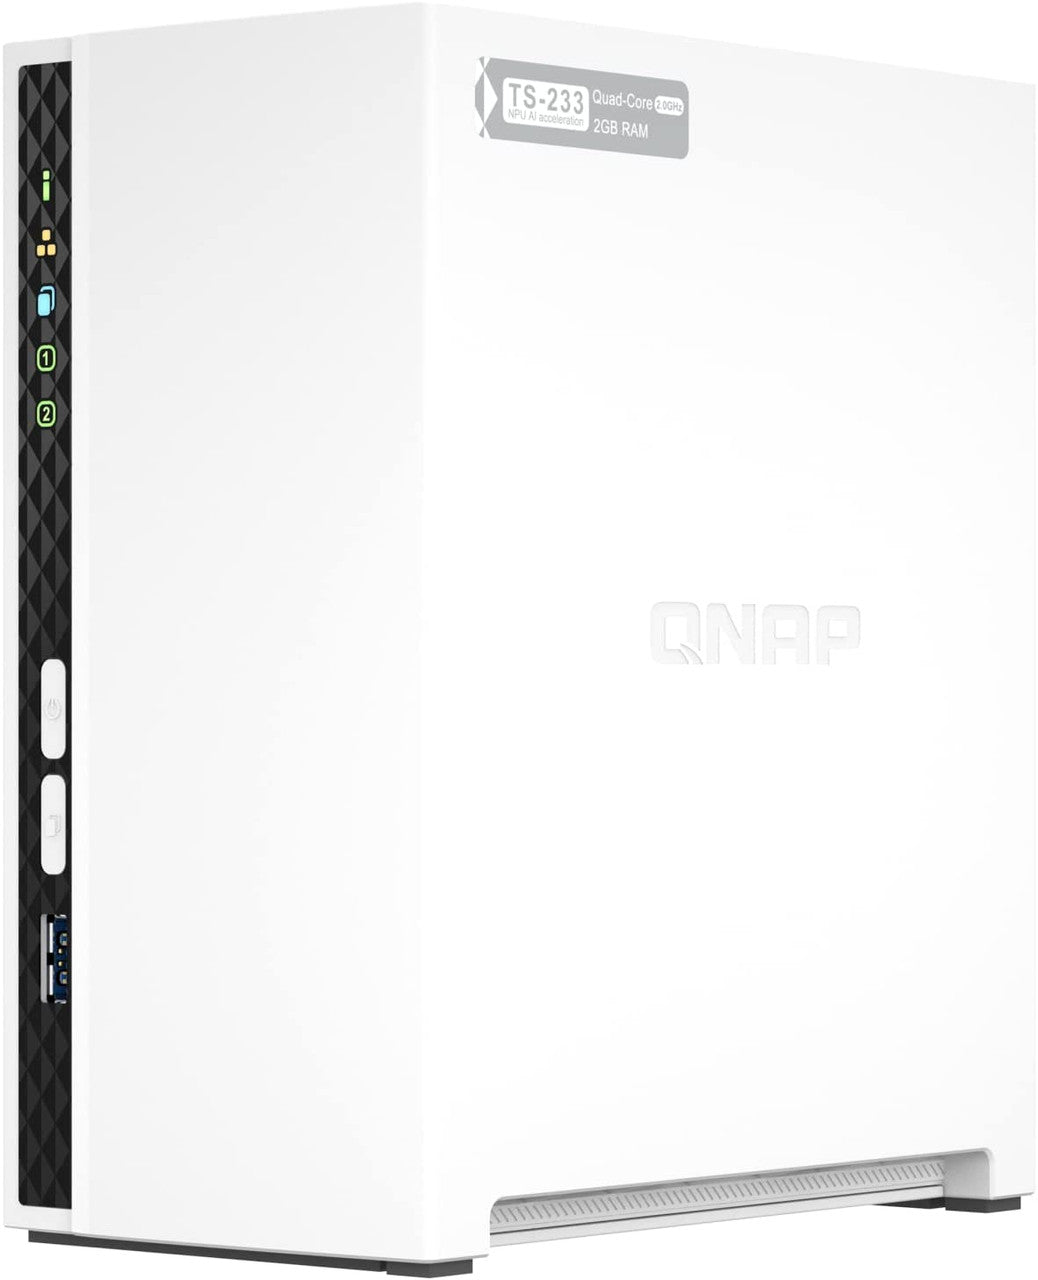 QNAP TS-233 2-Bay Desktop NAS with a 16TB (2 x 8TB) of Seagate Ironwolf NAS Drives Fully Assembled and Tested